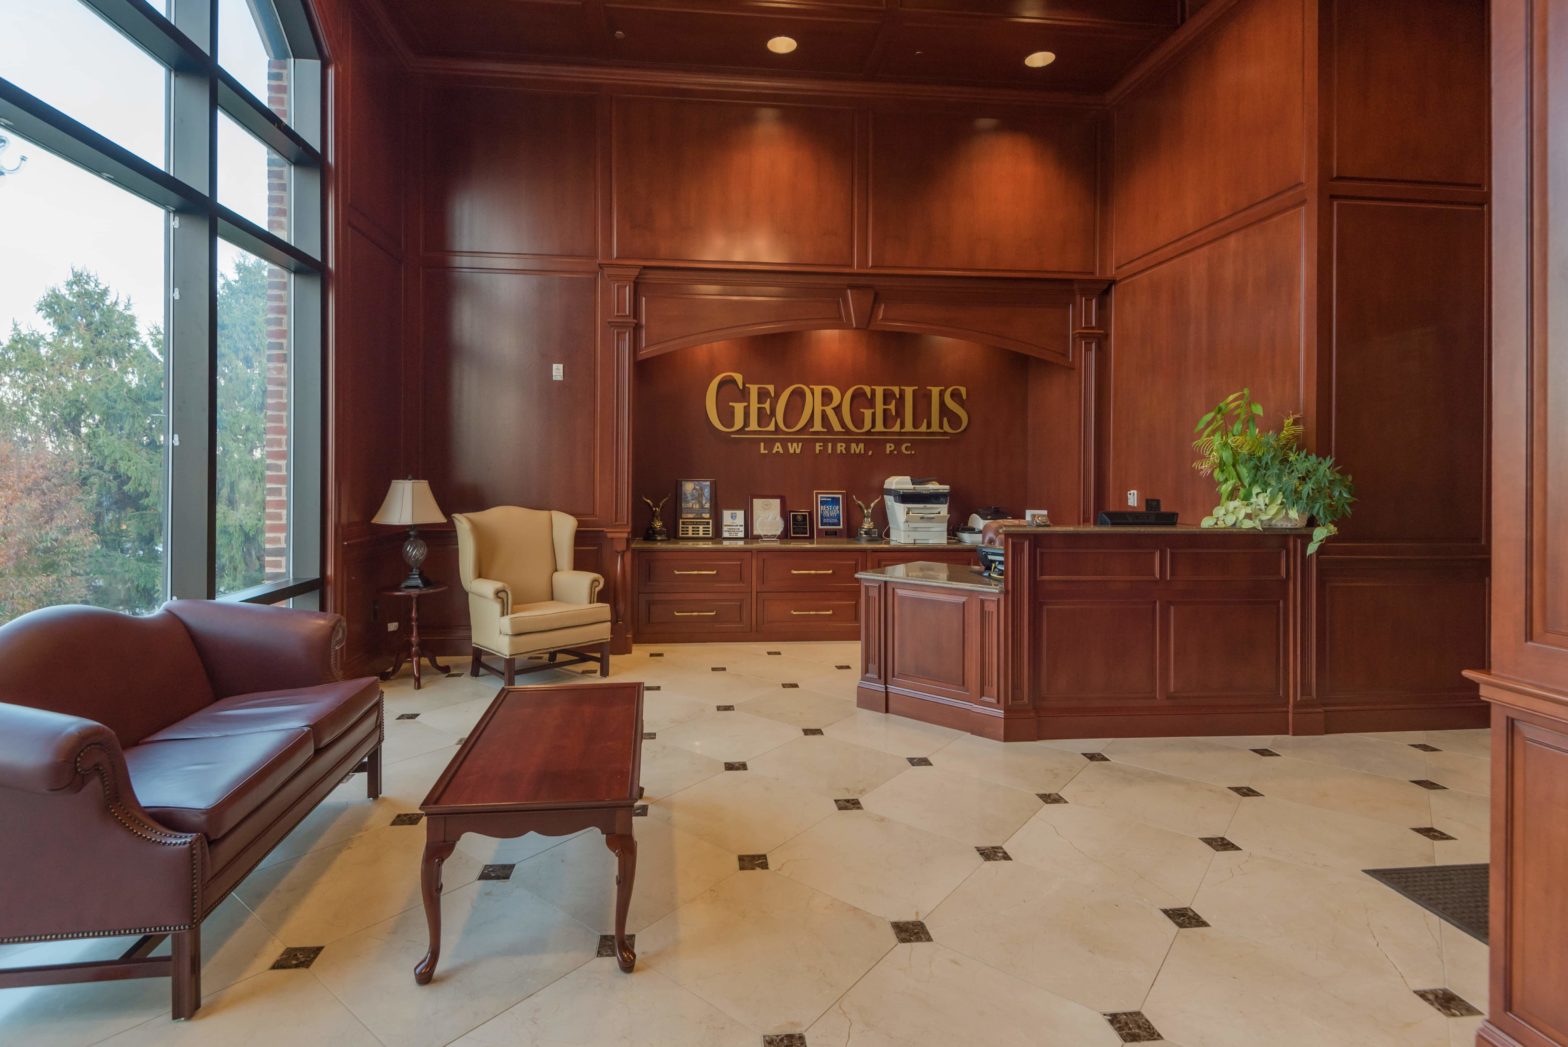 Inside Georgelis Law Firm, home of a lancaster laawyer team including personal injury lawyers and accident lawyers